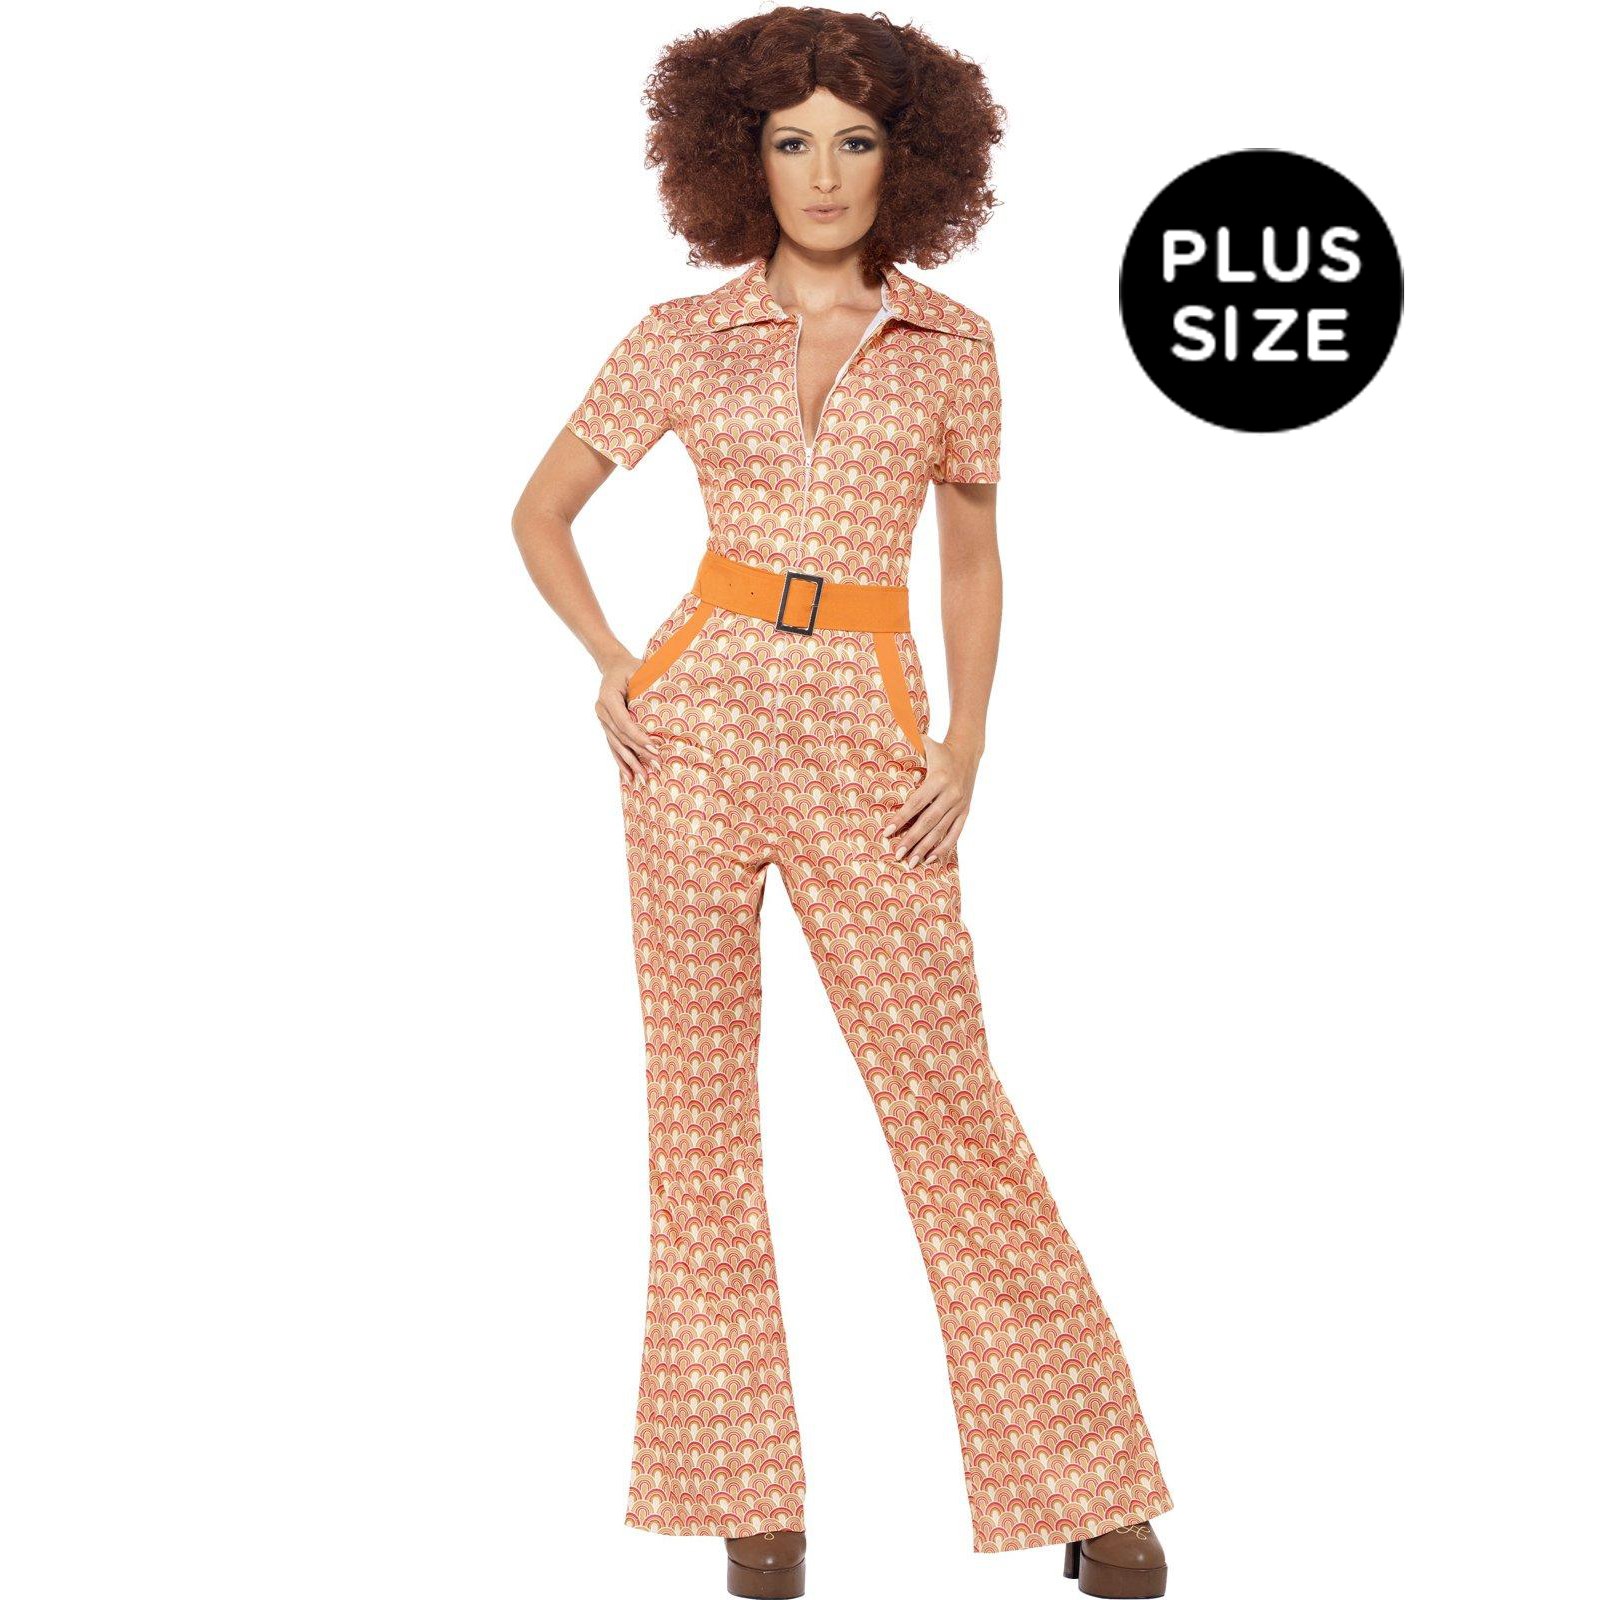 Womens Plus Size Authentic 70s Chic Costume